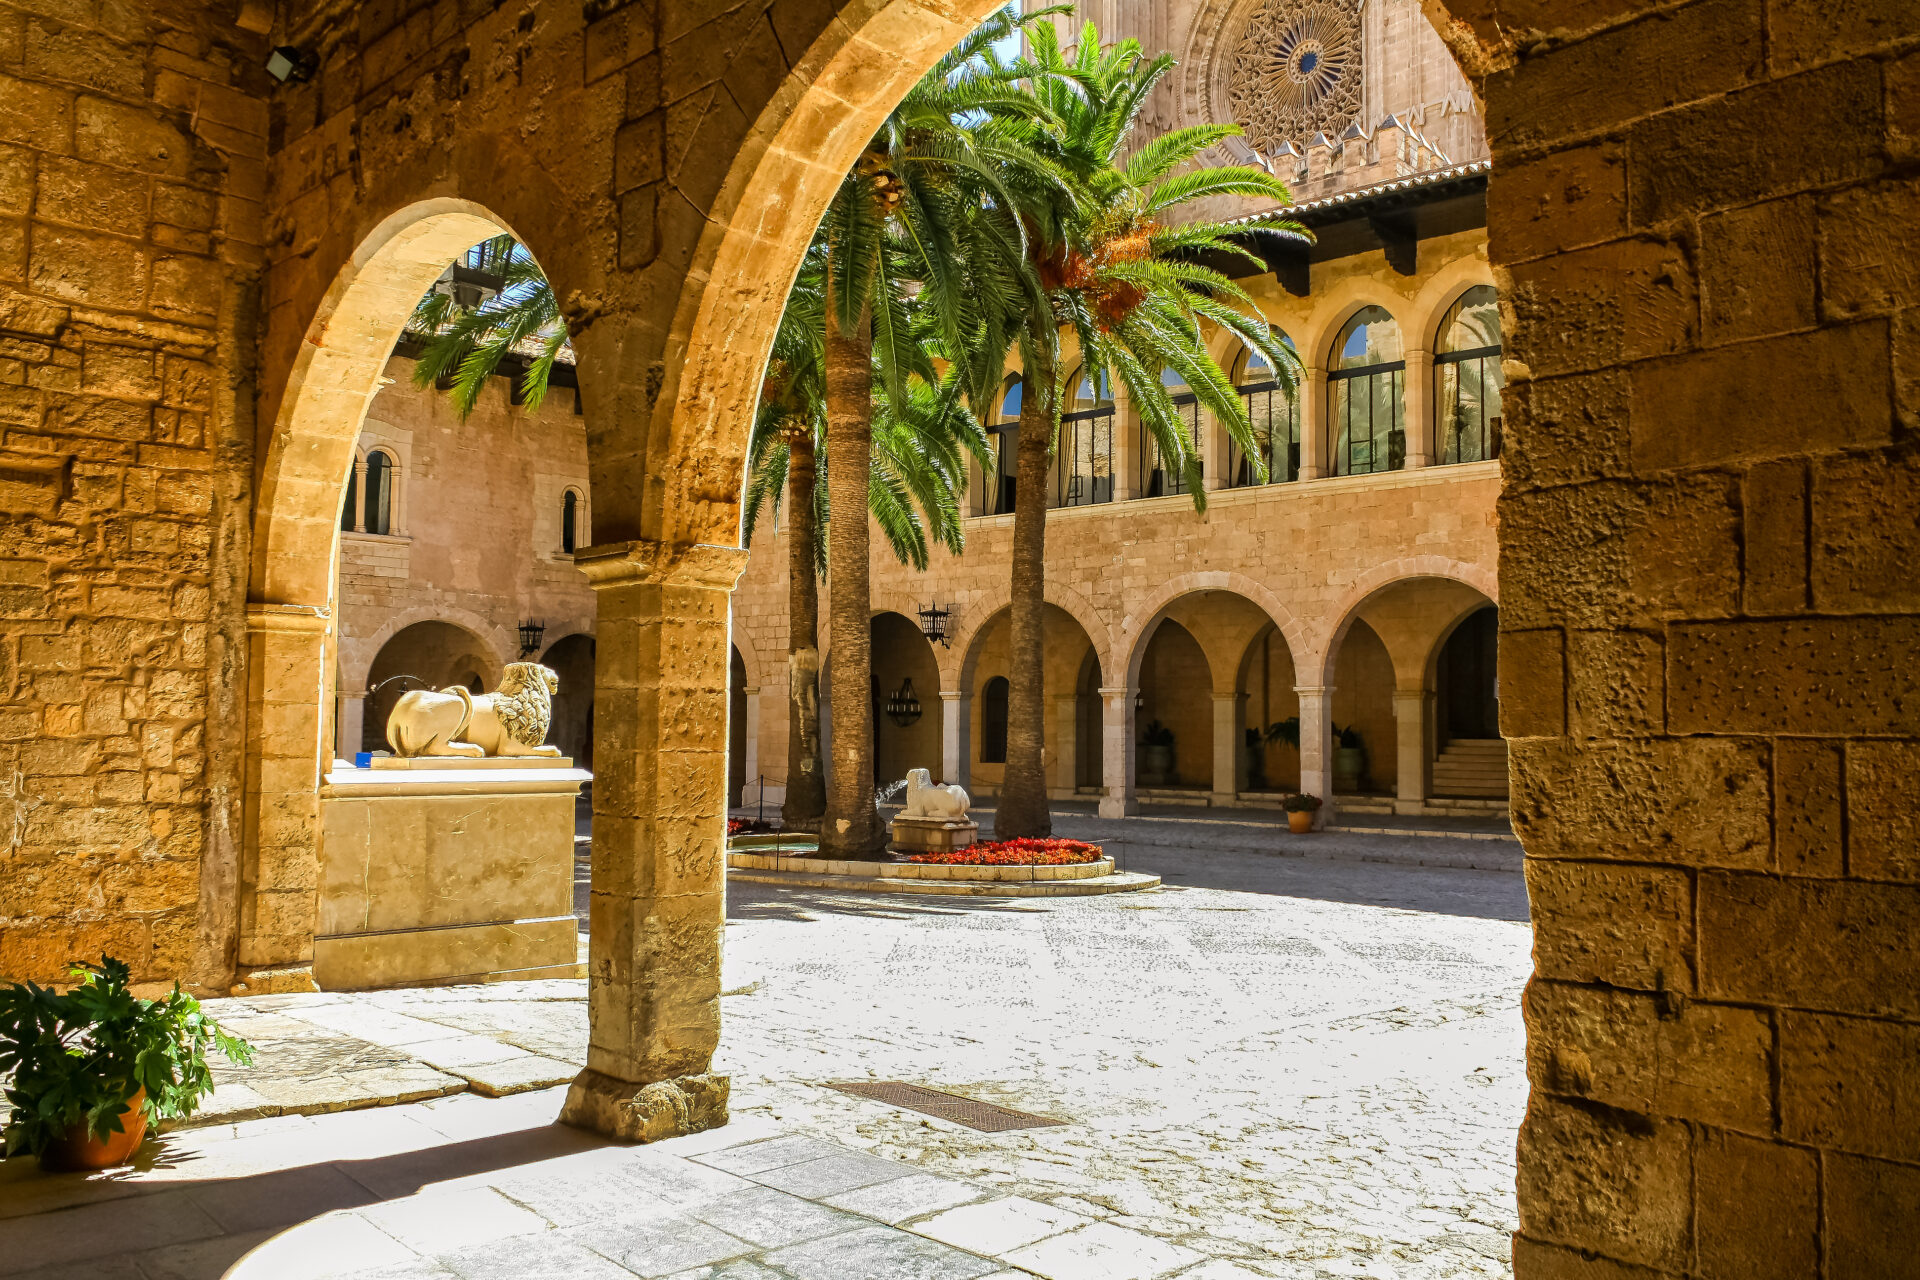 Interior of the cathedral of Mallorca with patio and stone arches.